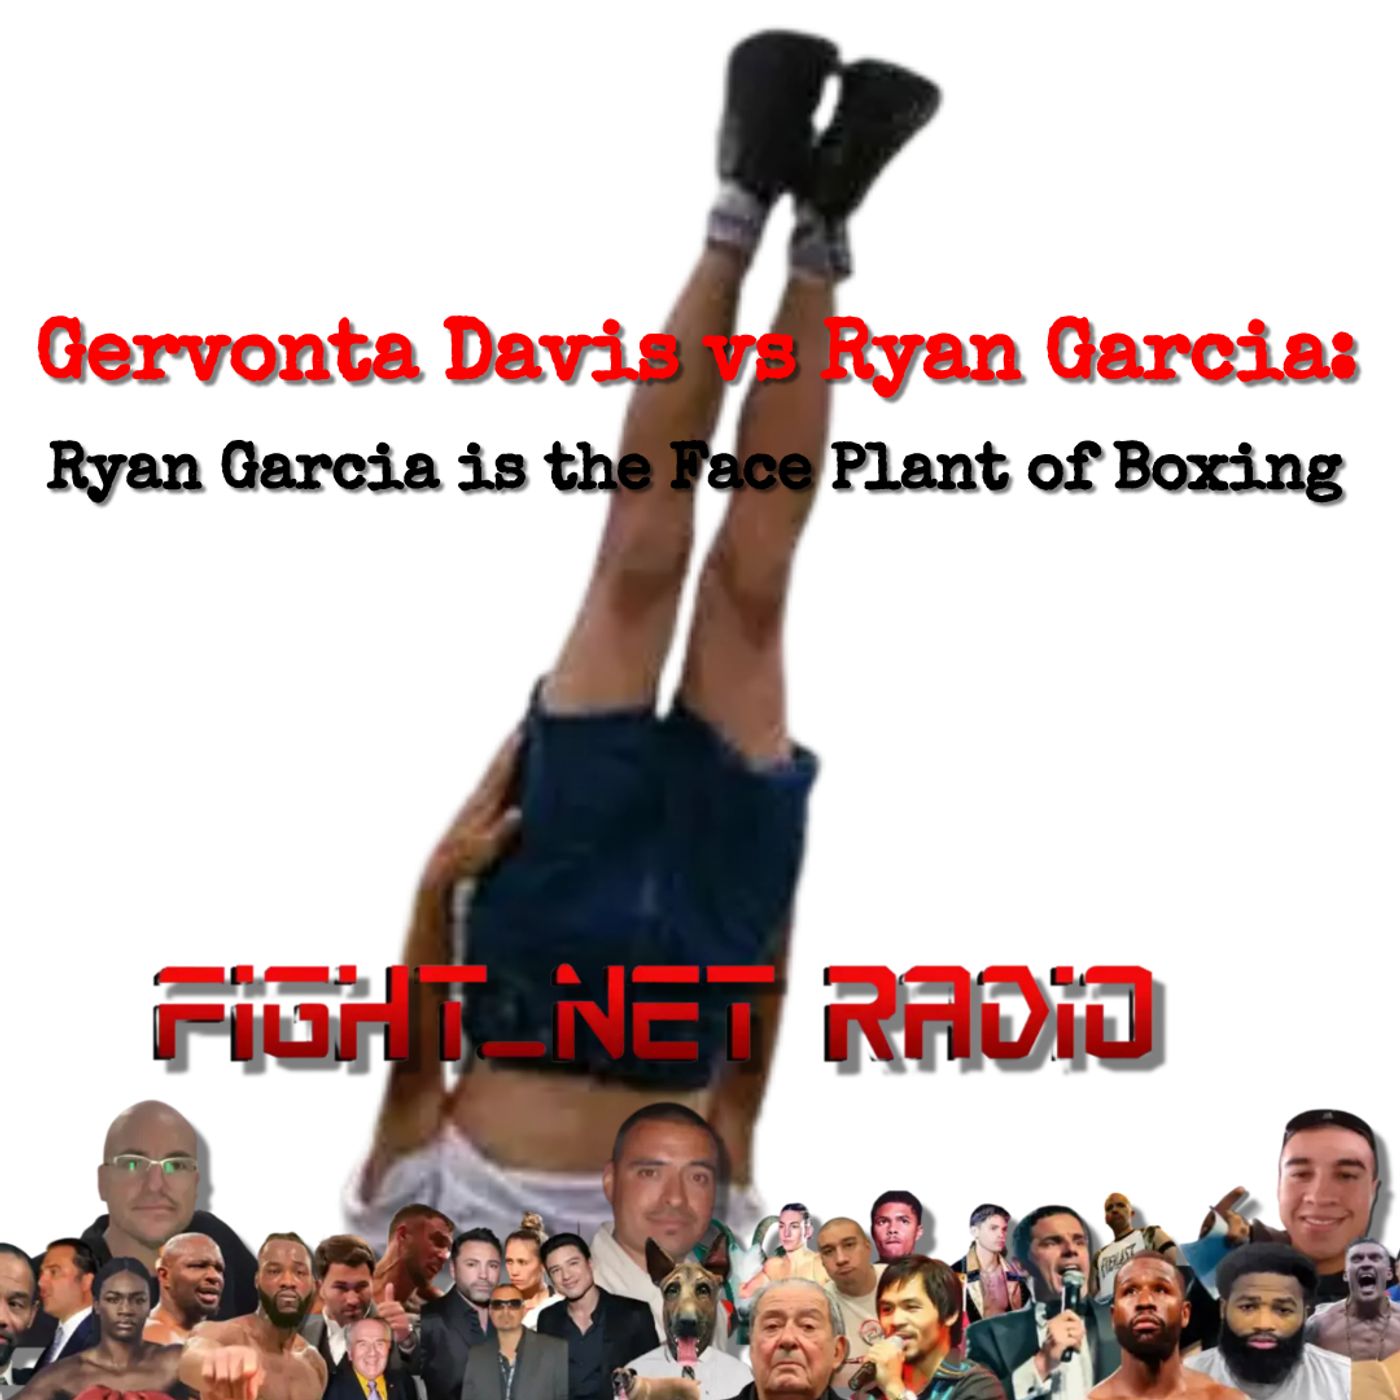 Ryan Garcia is the Face Plant of Boxing